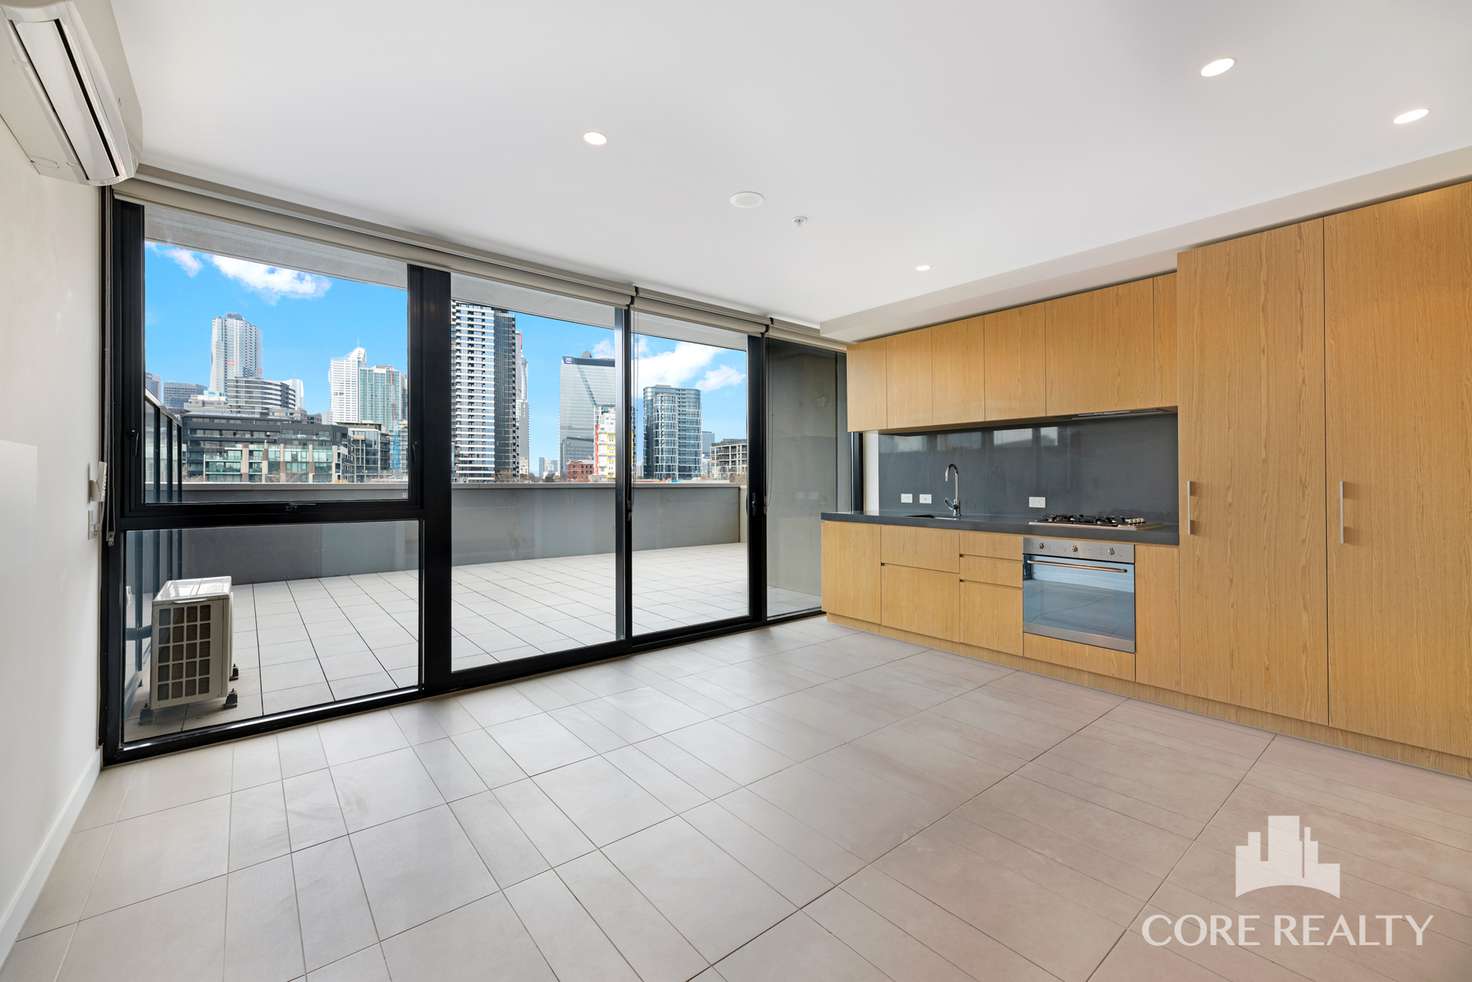 Main view of Homely apartment listing, 312/89 Roden Street, West Melbourne VIC 3003